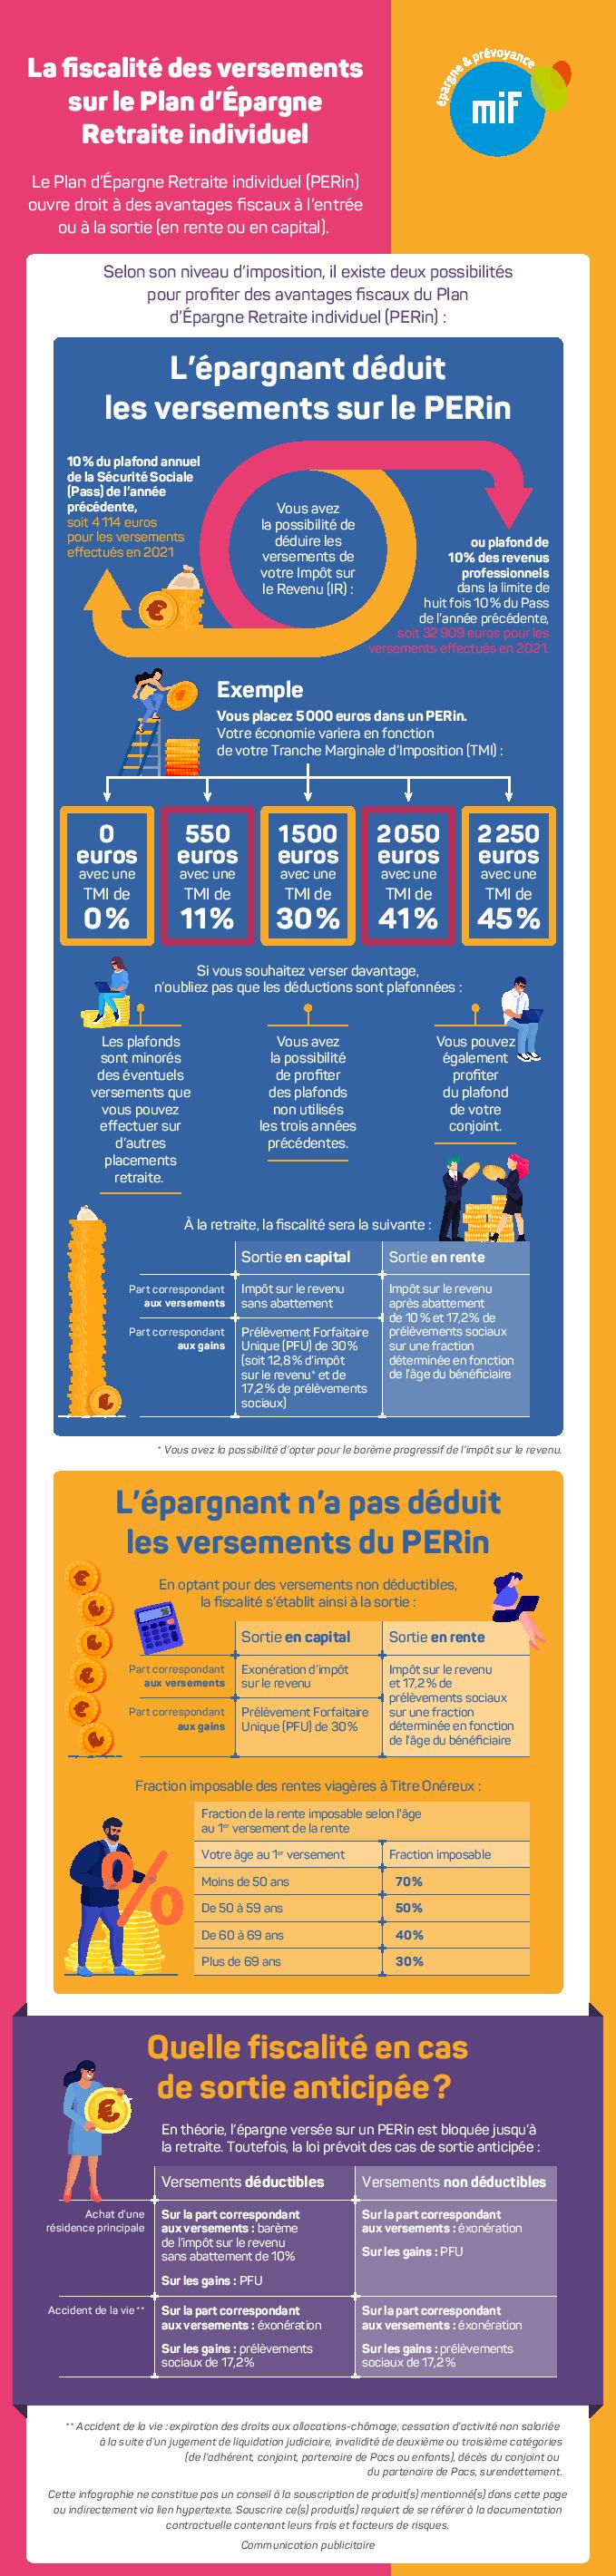 Infographie fiscalité PERin